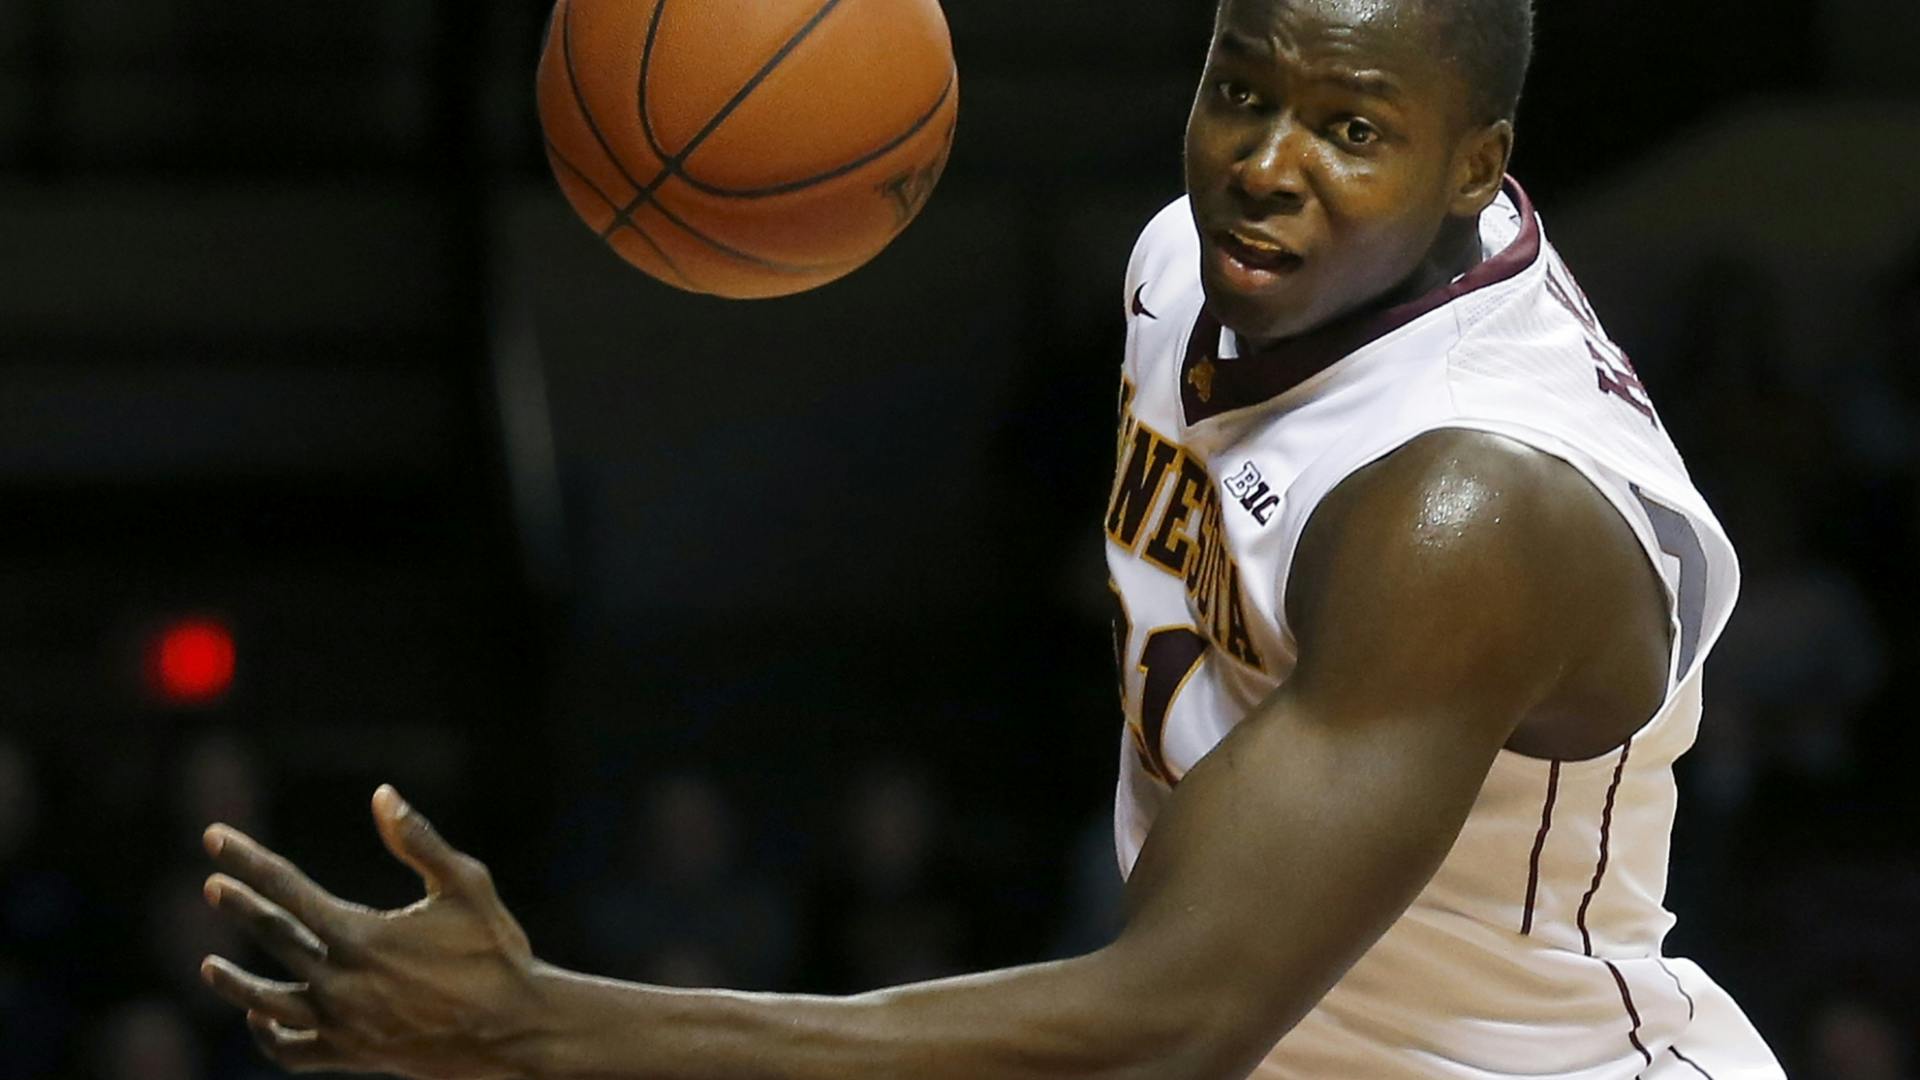 The Gophers big man talks about going through the ups and downs of a season that started with injury for him and had brought many struggles since.